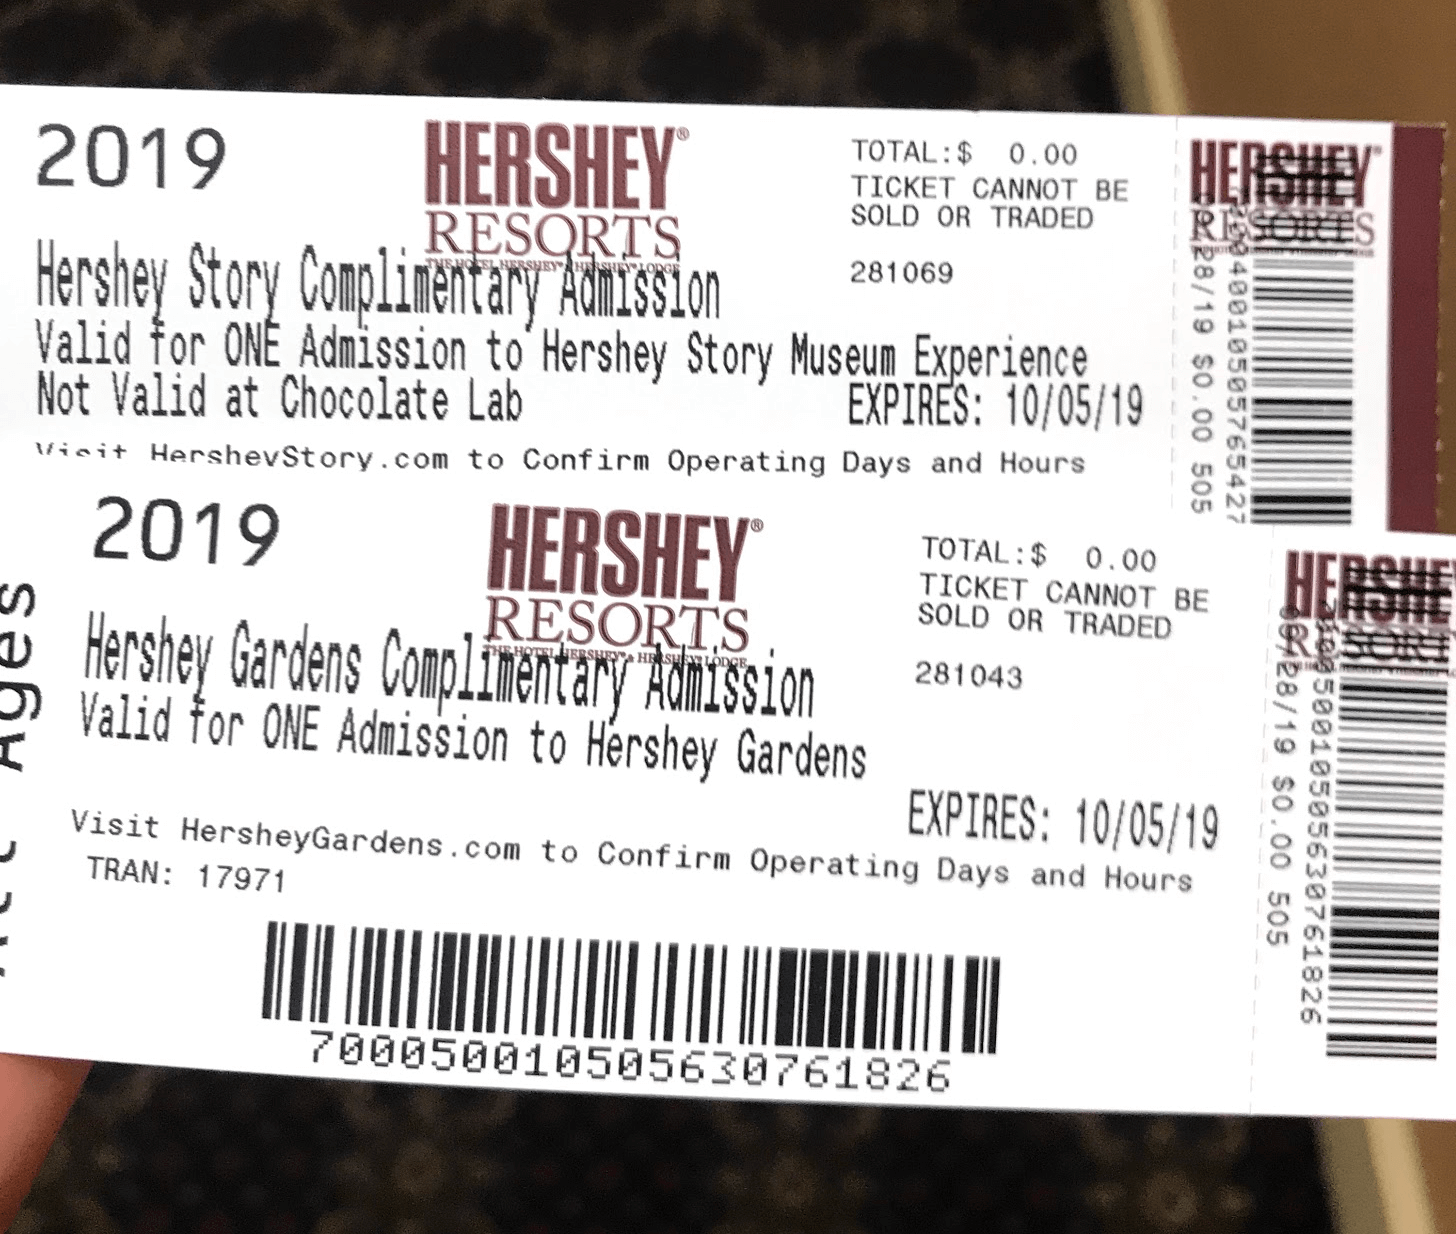 3 Ways to Save on Hershey’s Water Works at the Hershey Lodge Frugal